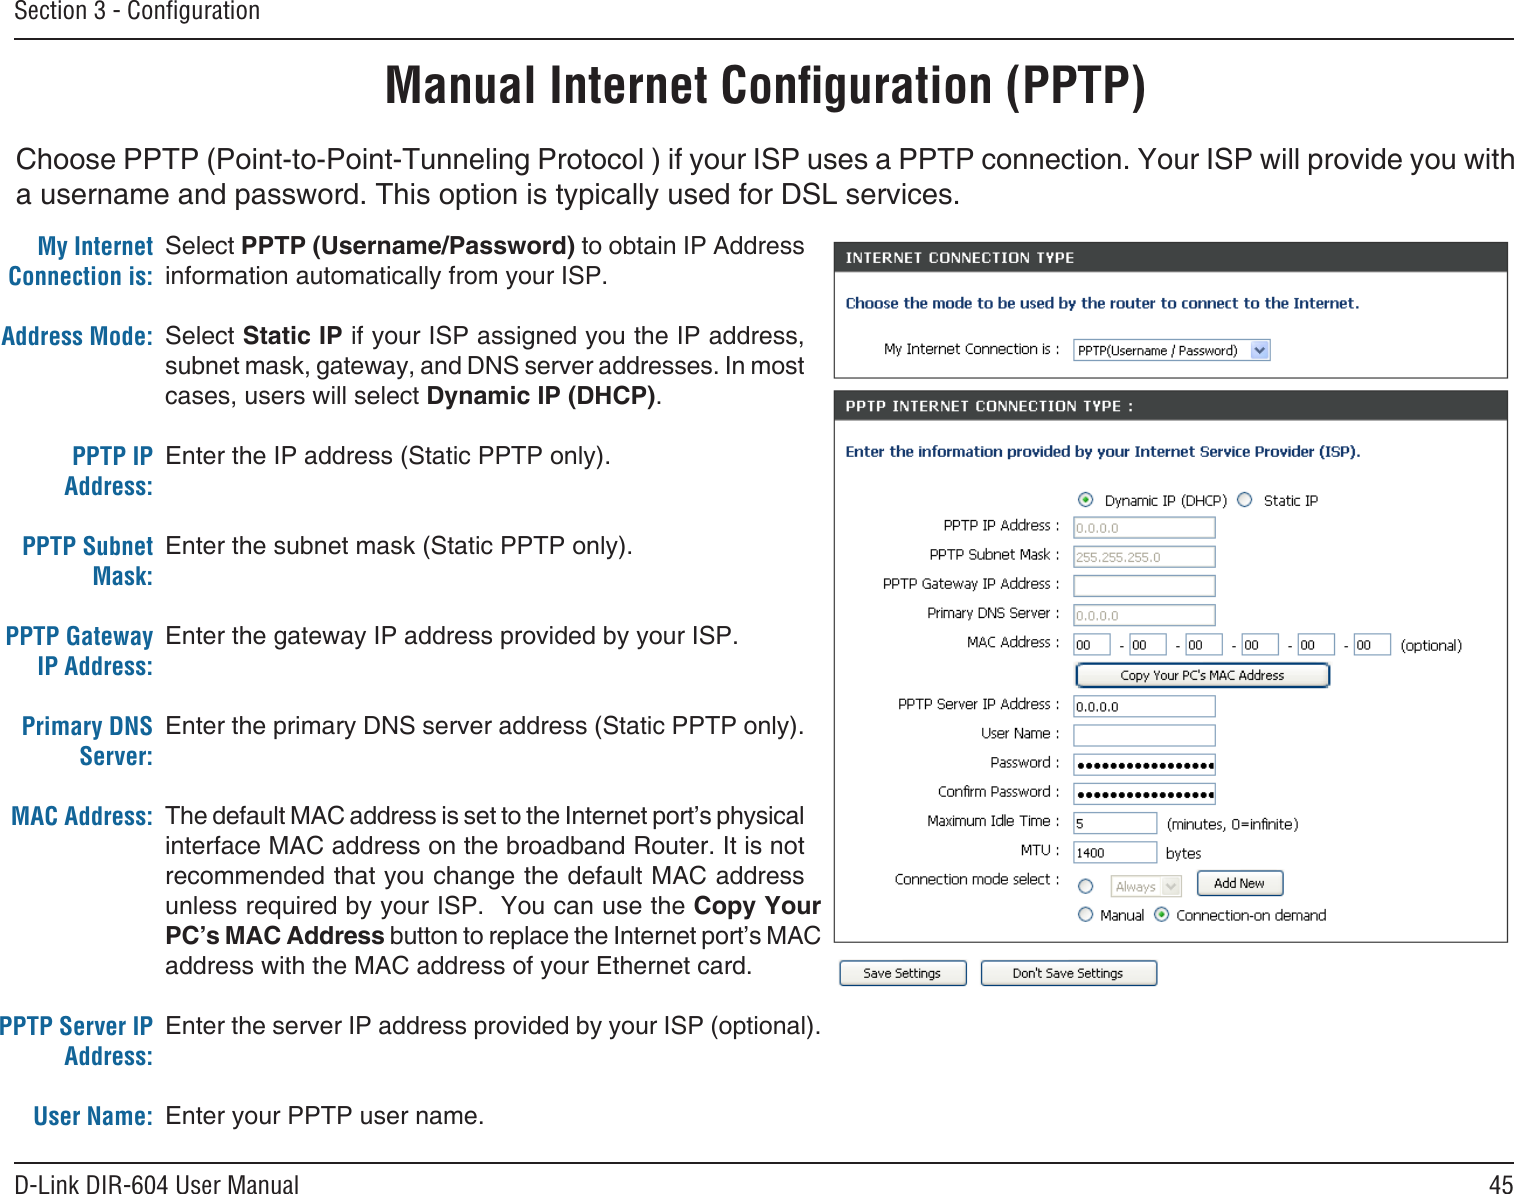 45D-Link DIR-604 User ManualSection 3 - ConﬁgurationChoose PPTP (Point-to-Point-Tunneling Protocol ) if your ISP uses a PPTP connection. Your ISP will provide you with a username and password. This option is typically used for DSL services. Manual Internet Conﬁguration (PPTP)Select PPTP (Username/Password) to obtain IP Address information automatically from your ISP. Select Static IP if your ISP assigned you the IP address, subnet mask, gateway, and DNS server addresses. In most cases, users will select Dynamic IP (DHCP).Enter the IP address (Static PPTP only).Enter the subnet mask (Static PPTP only).Enter the gateway IP address provided by your ISP.Enter the primary DNS server address (Static PPTP only).The default MAC address is set to the Internet port’s physical interface MAC address on the broadband Router. It is not recommended that you change the default MAC address unless required by your ISP.  You can use the Copy Your PC’s MAC Address button to replace the Internet port’s MAC address with the MAC address of your Ethernet card.Enter the server IP address provided by your ISP (optional).Enter your PPTP user name.My Internet Connection is:Address Mode: PPTP IP Address:PPTP Subnet Mask:PPTP Gateway IP Address:Primary DNS Server:MAC Address:PPTP Server IP Address:User Name: